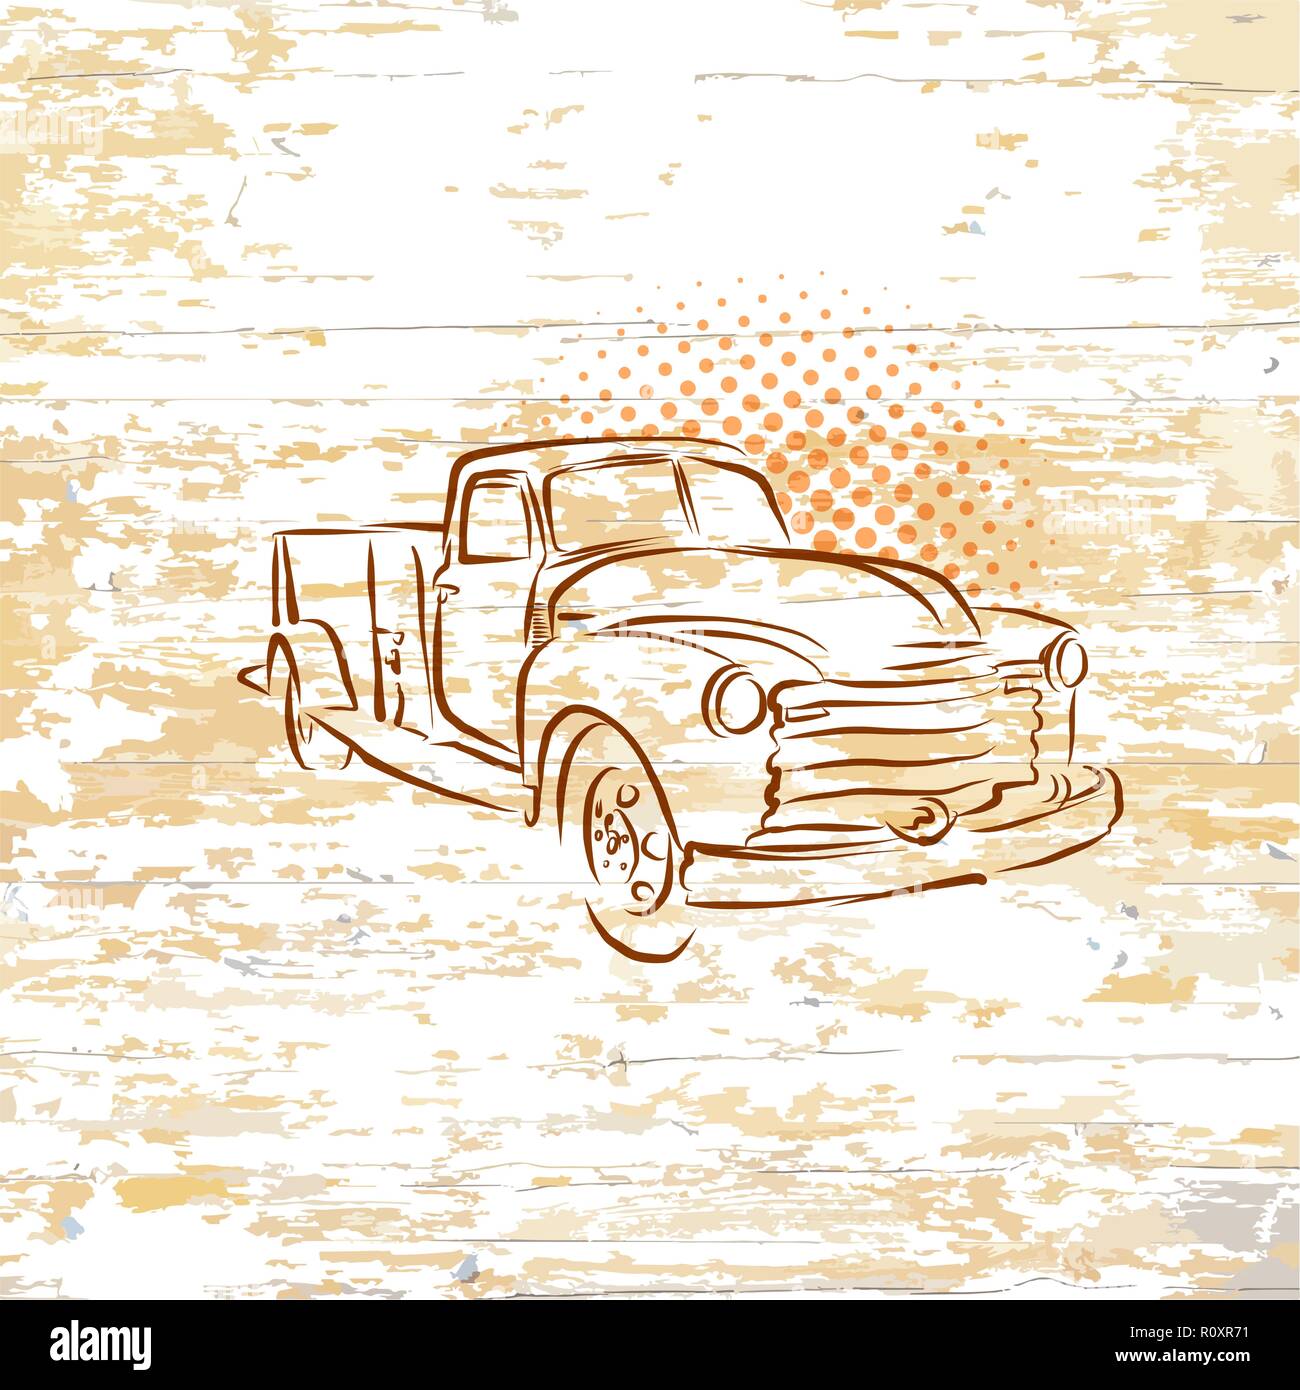 Vintage pickup truck on wooden background. Vector illustration drawn by hand. Stock Vector